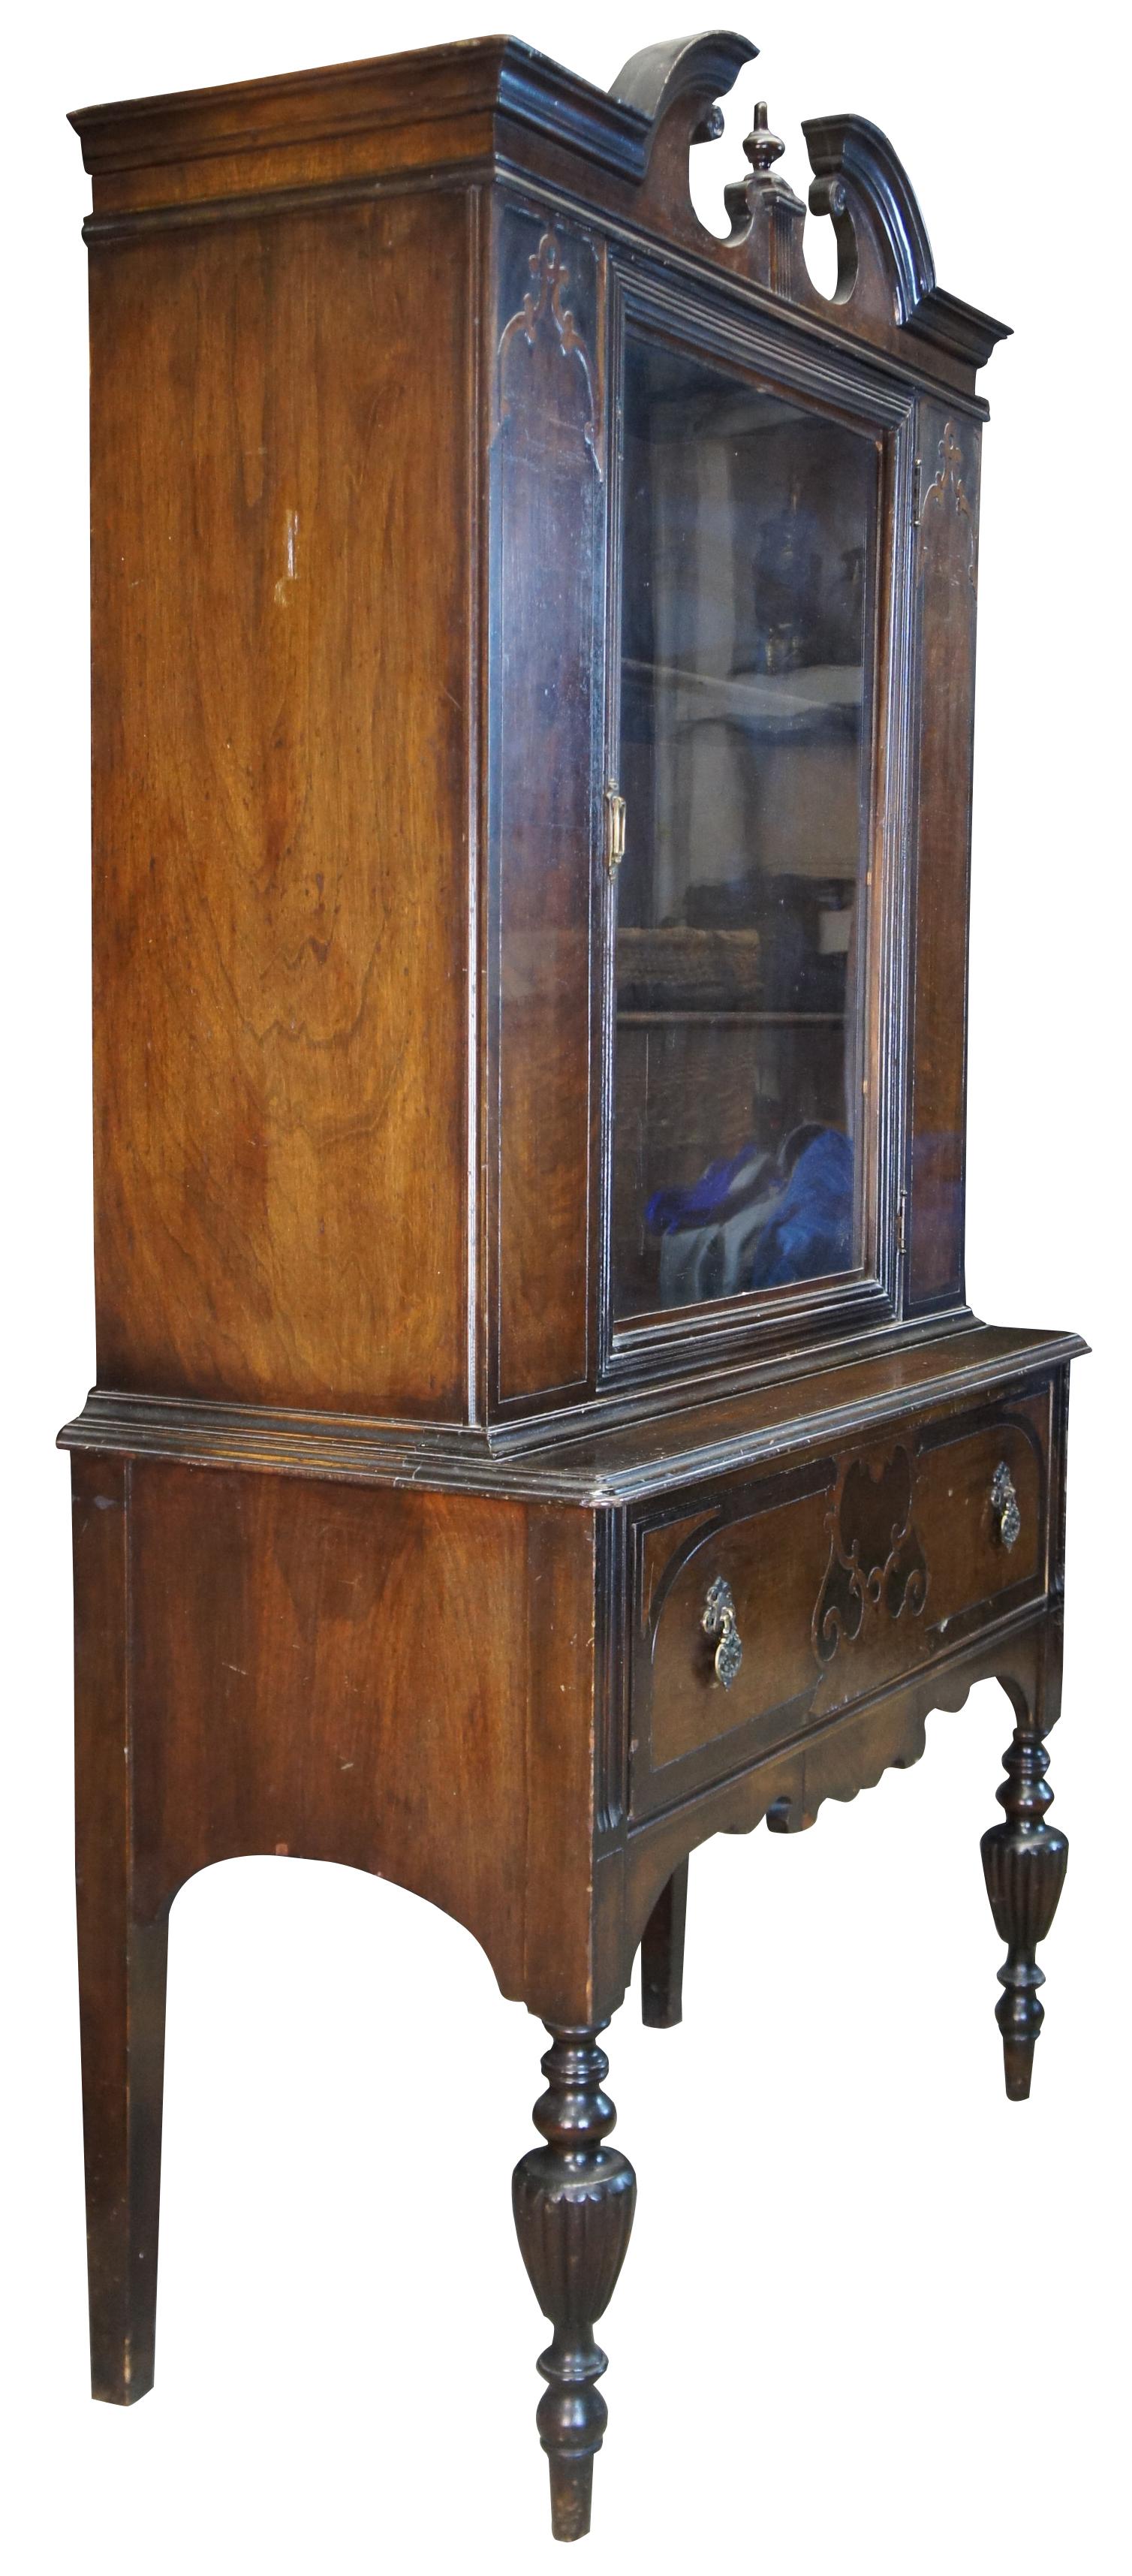 Jacobean revival china hutch, circa 1940s. Made from walnut with a burled front panels. Features two shelves concealed by a large central door over dovetailed silverware drawer. Includes an open pediment crown and serpentine lower apron. The cabinet